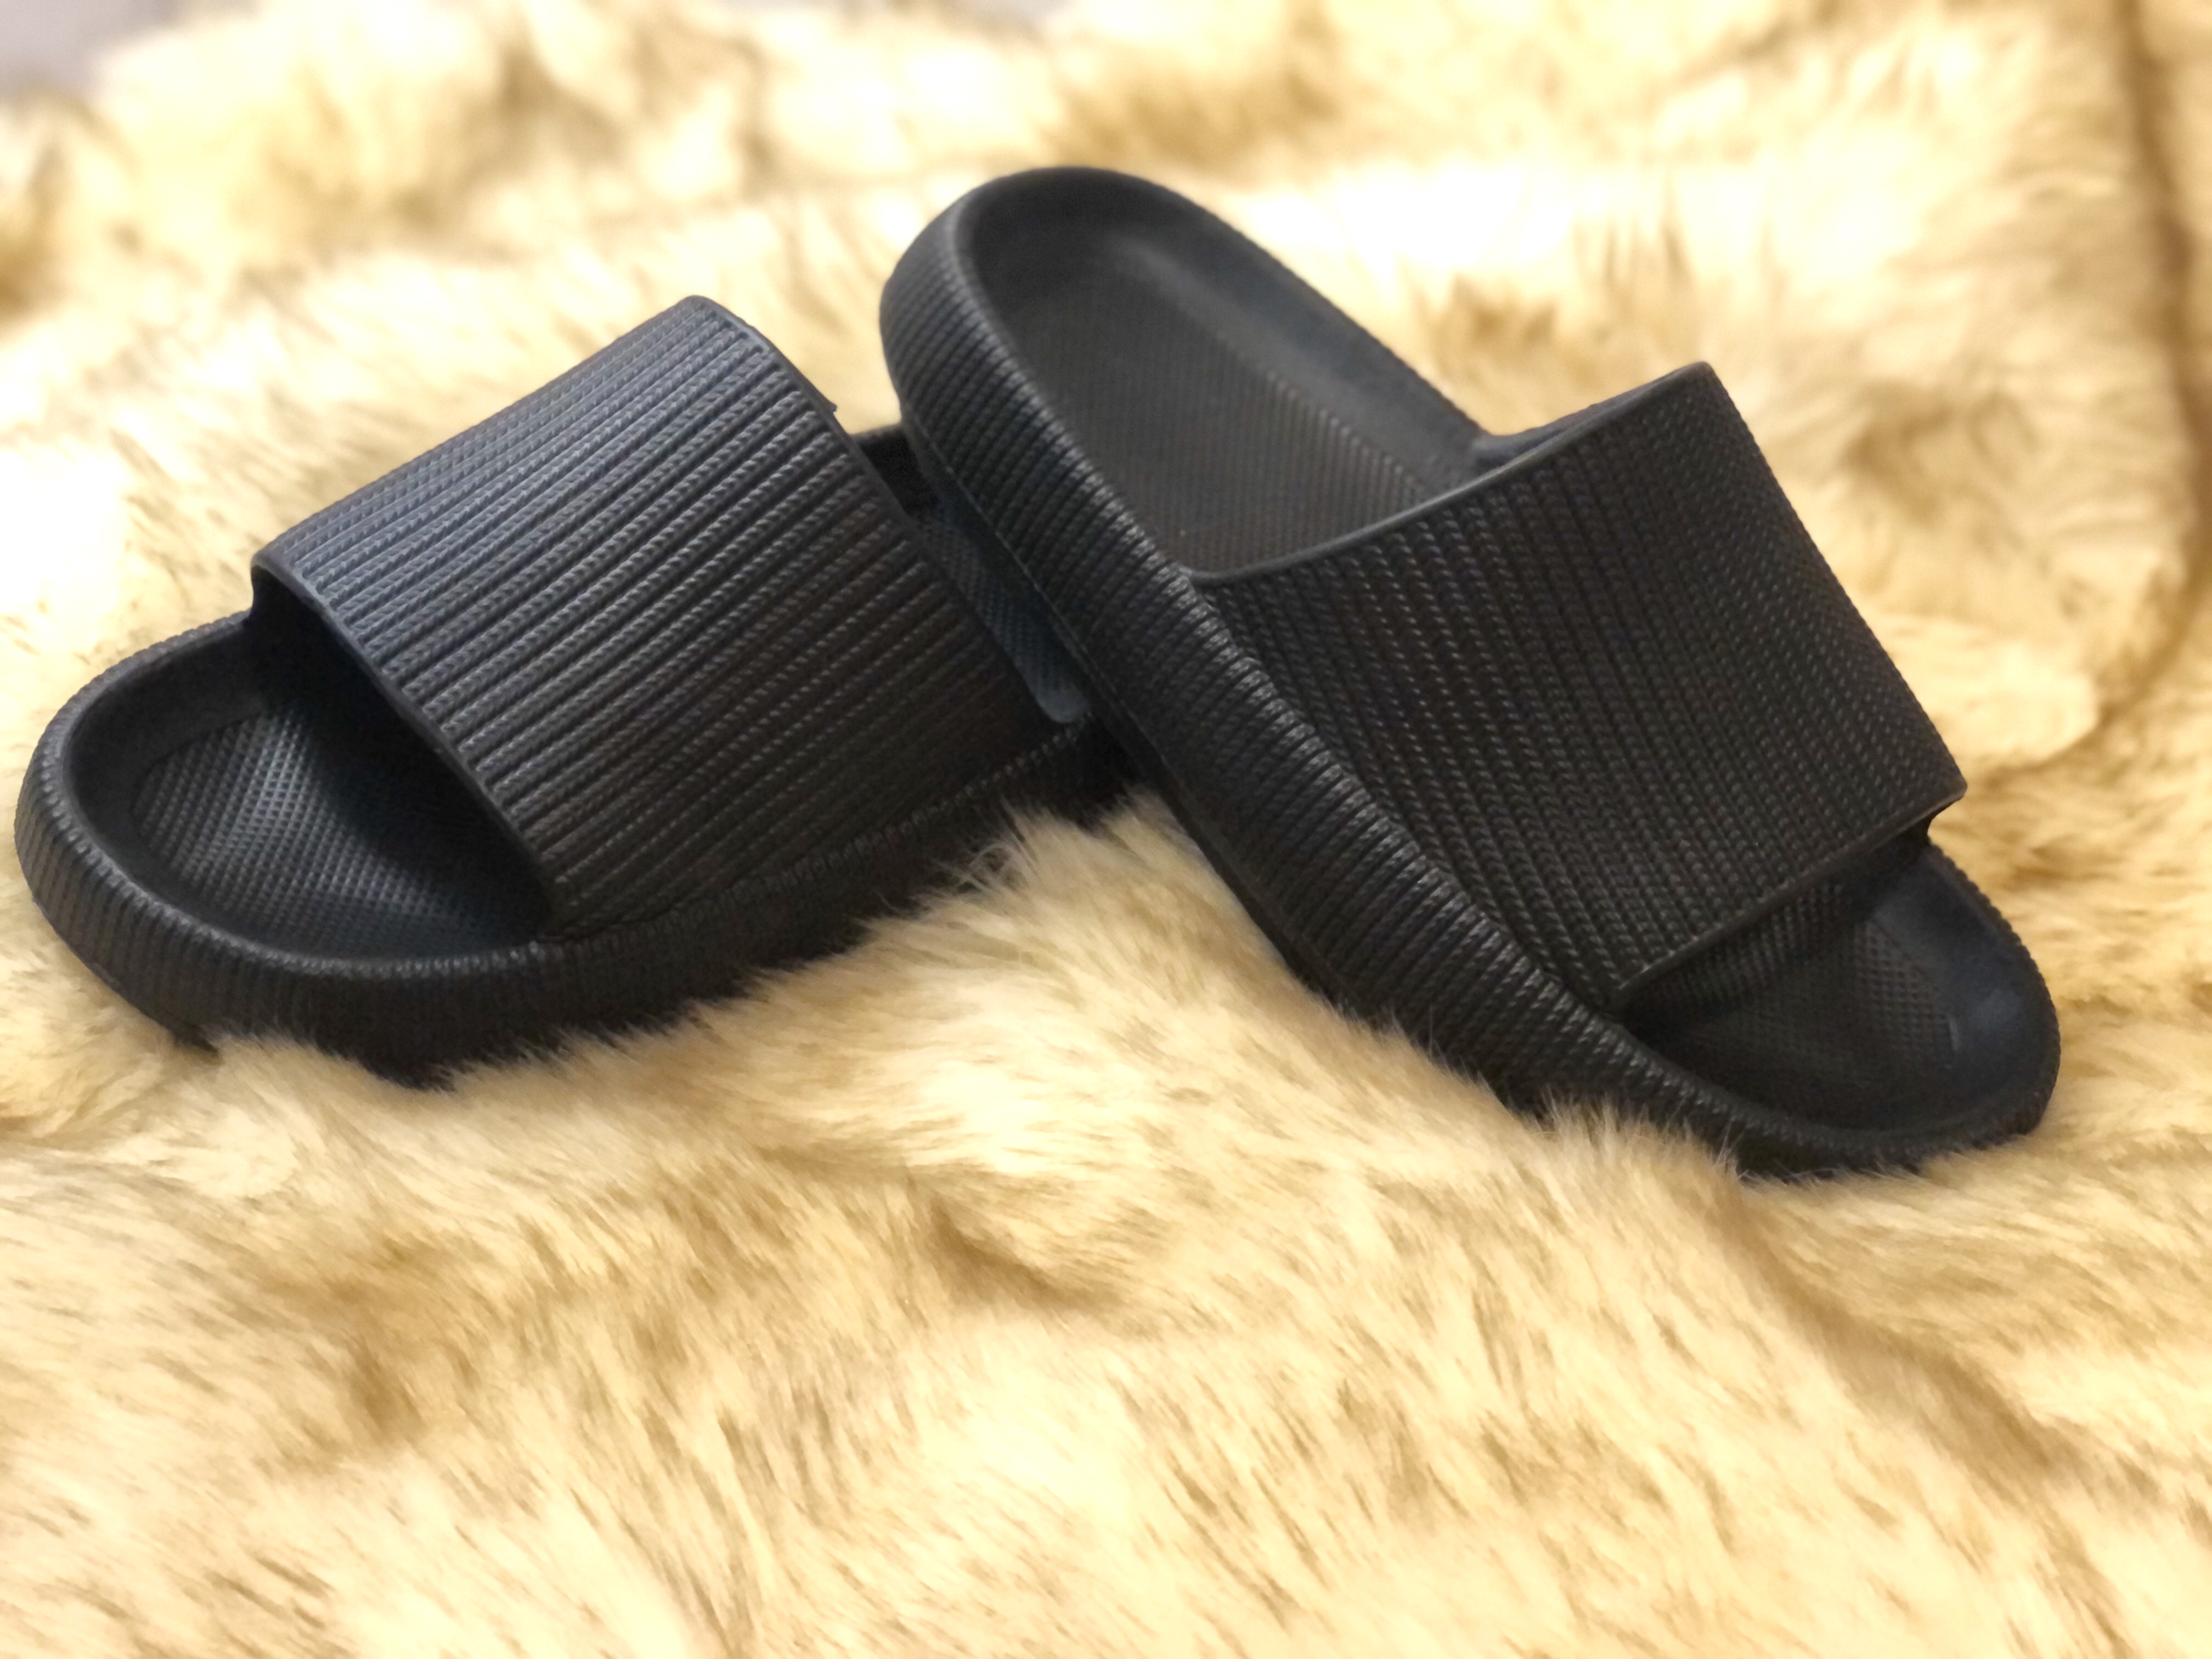 Pillow slides are the latest 'ugly' shoe trend to go viral on TikTok